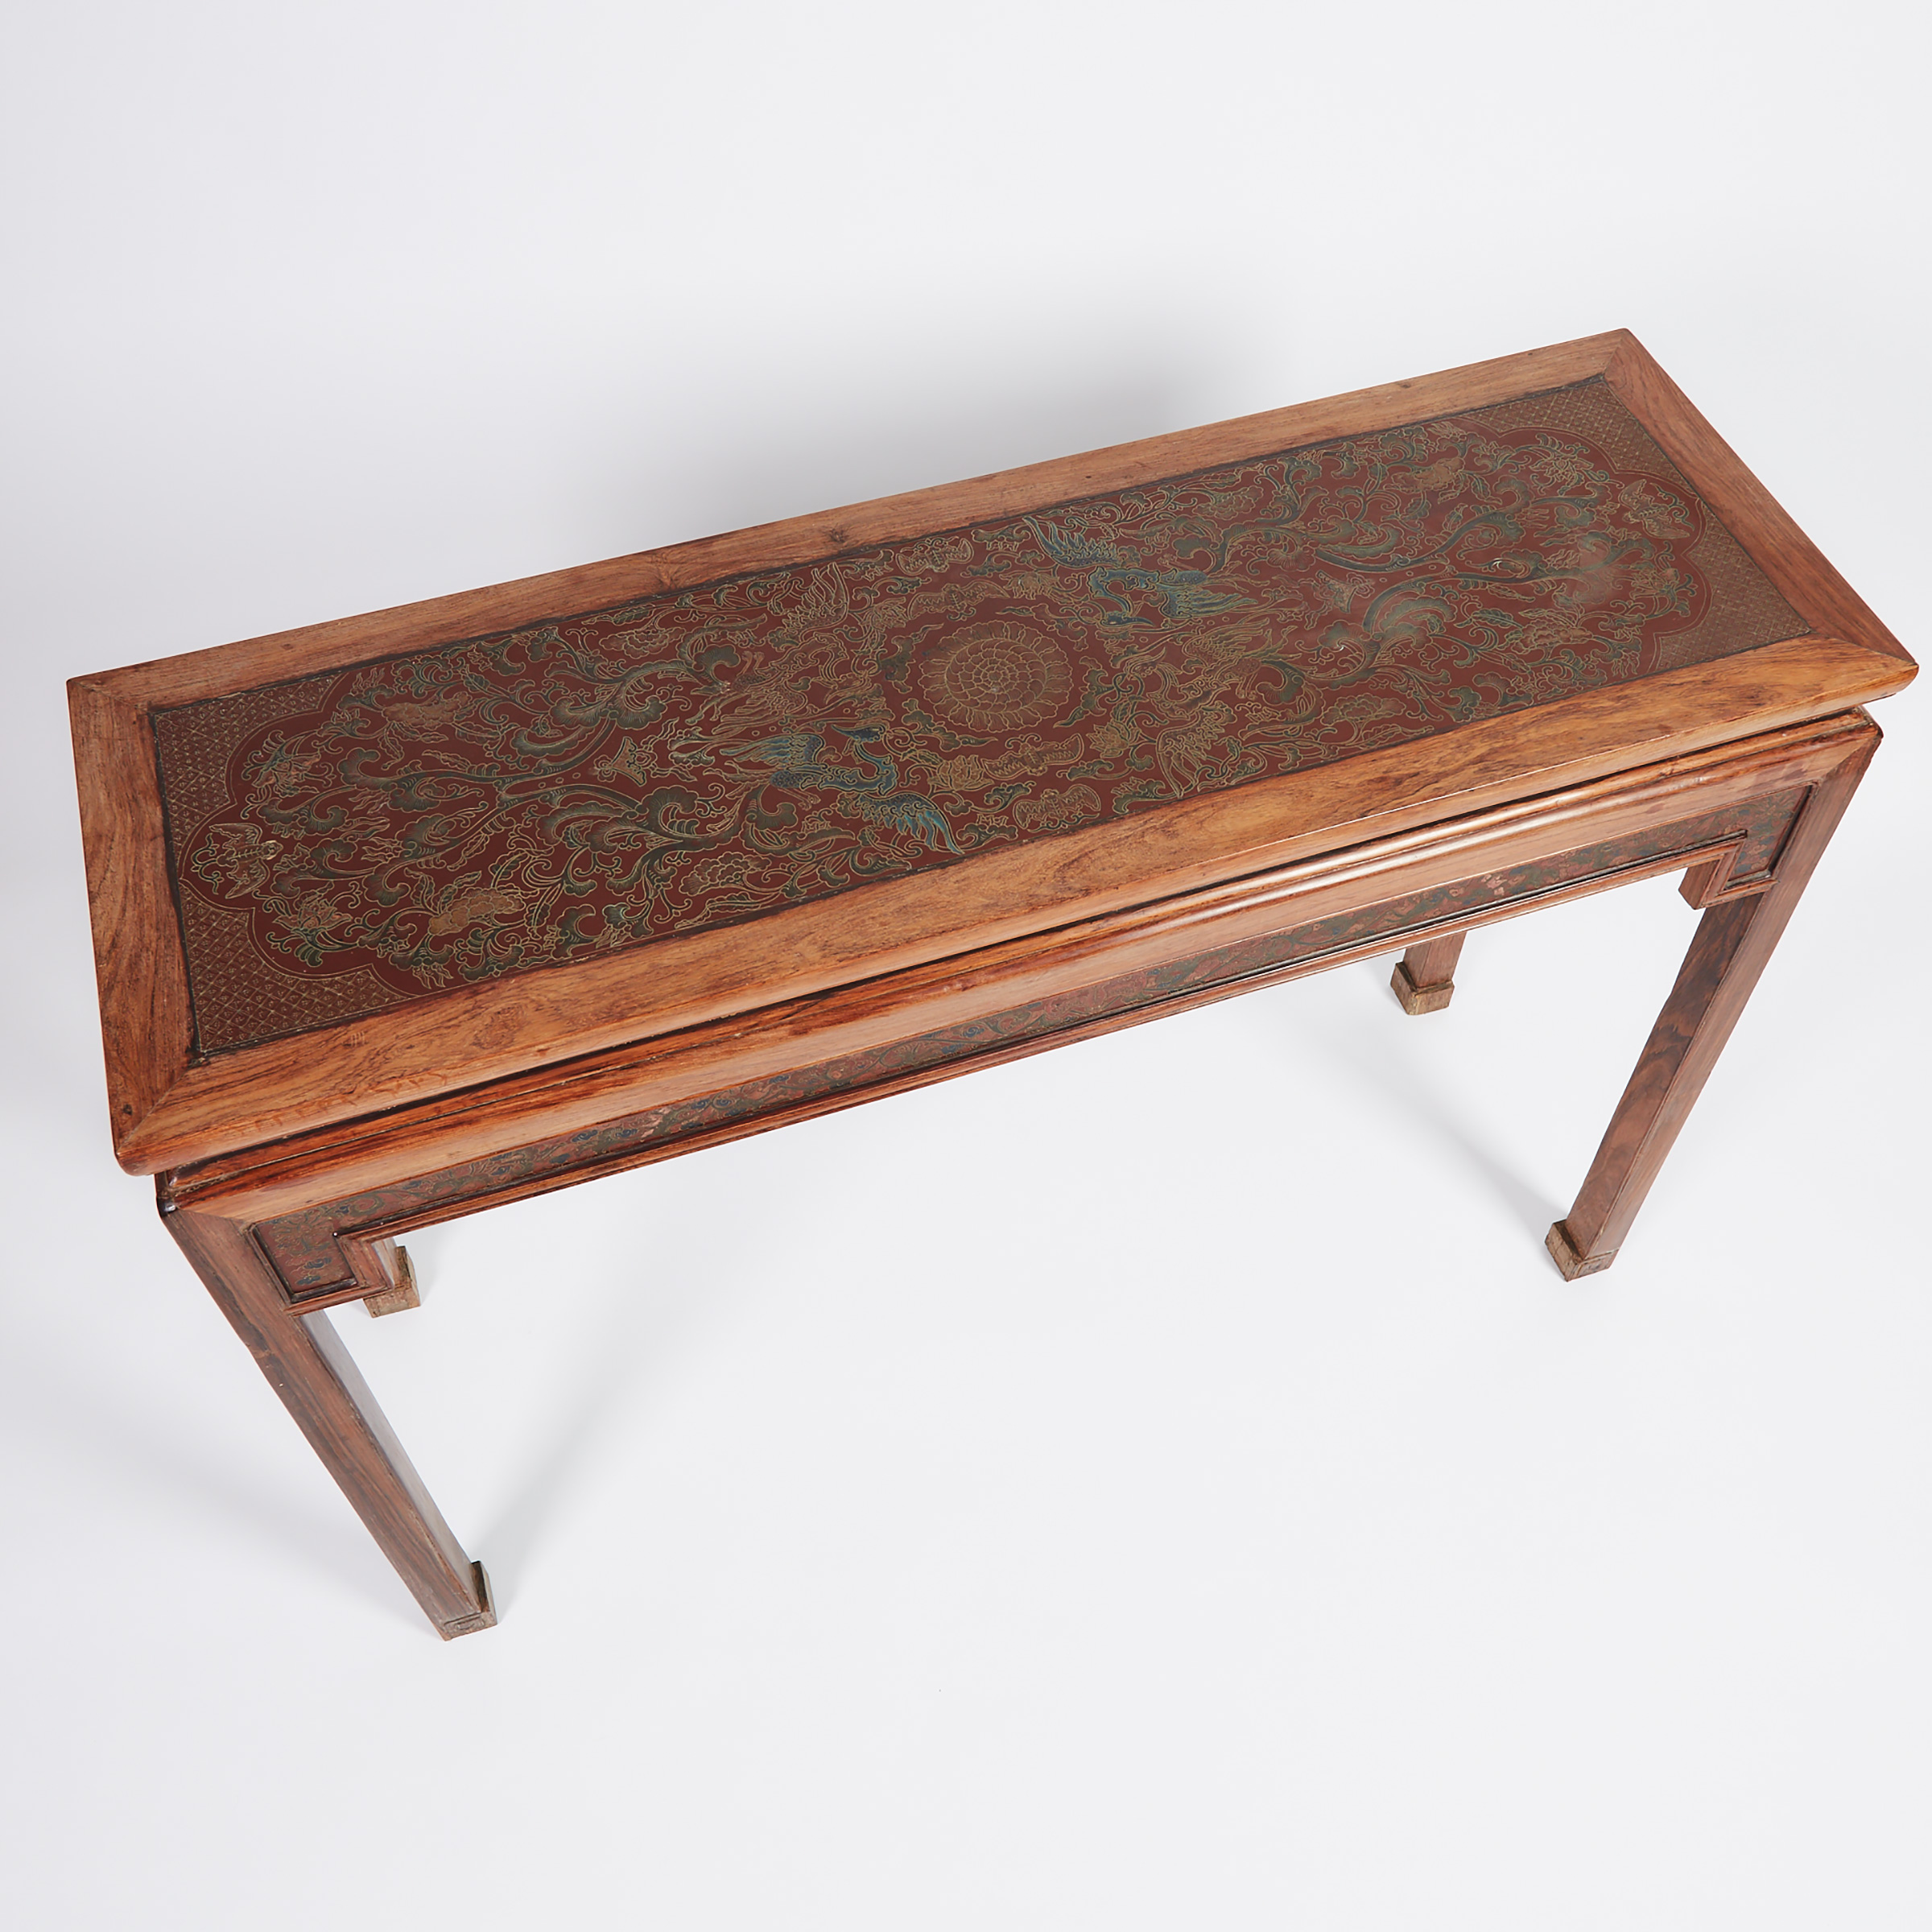 A Hardwood Carved and Lacquered Top Long Table